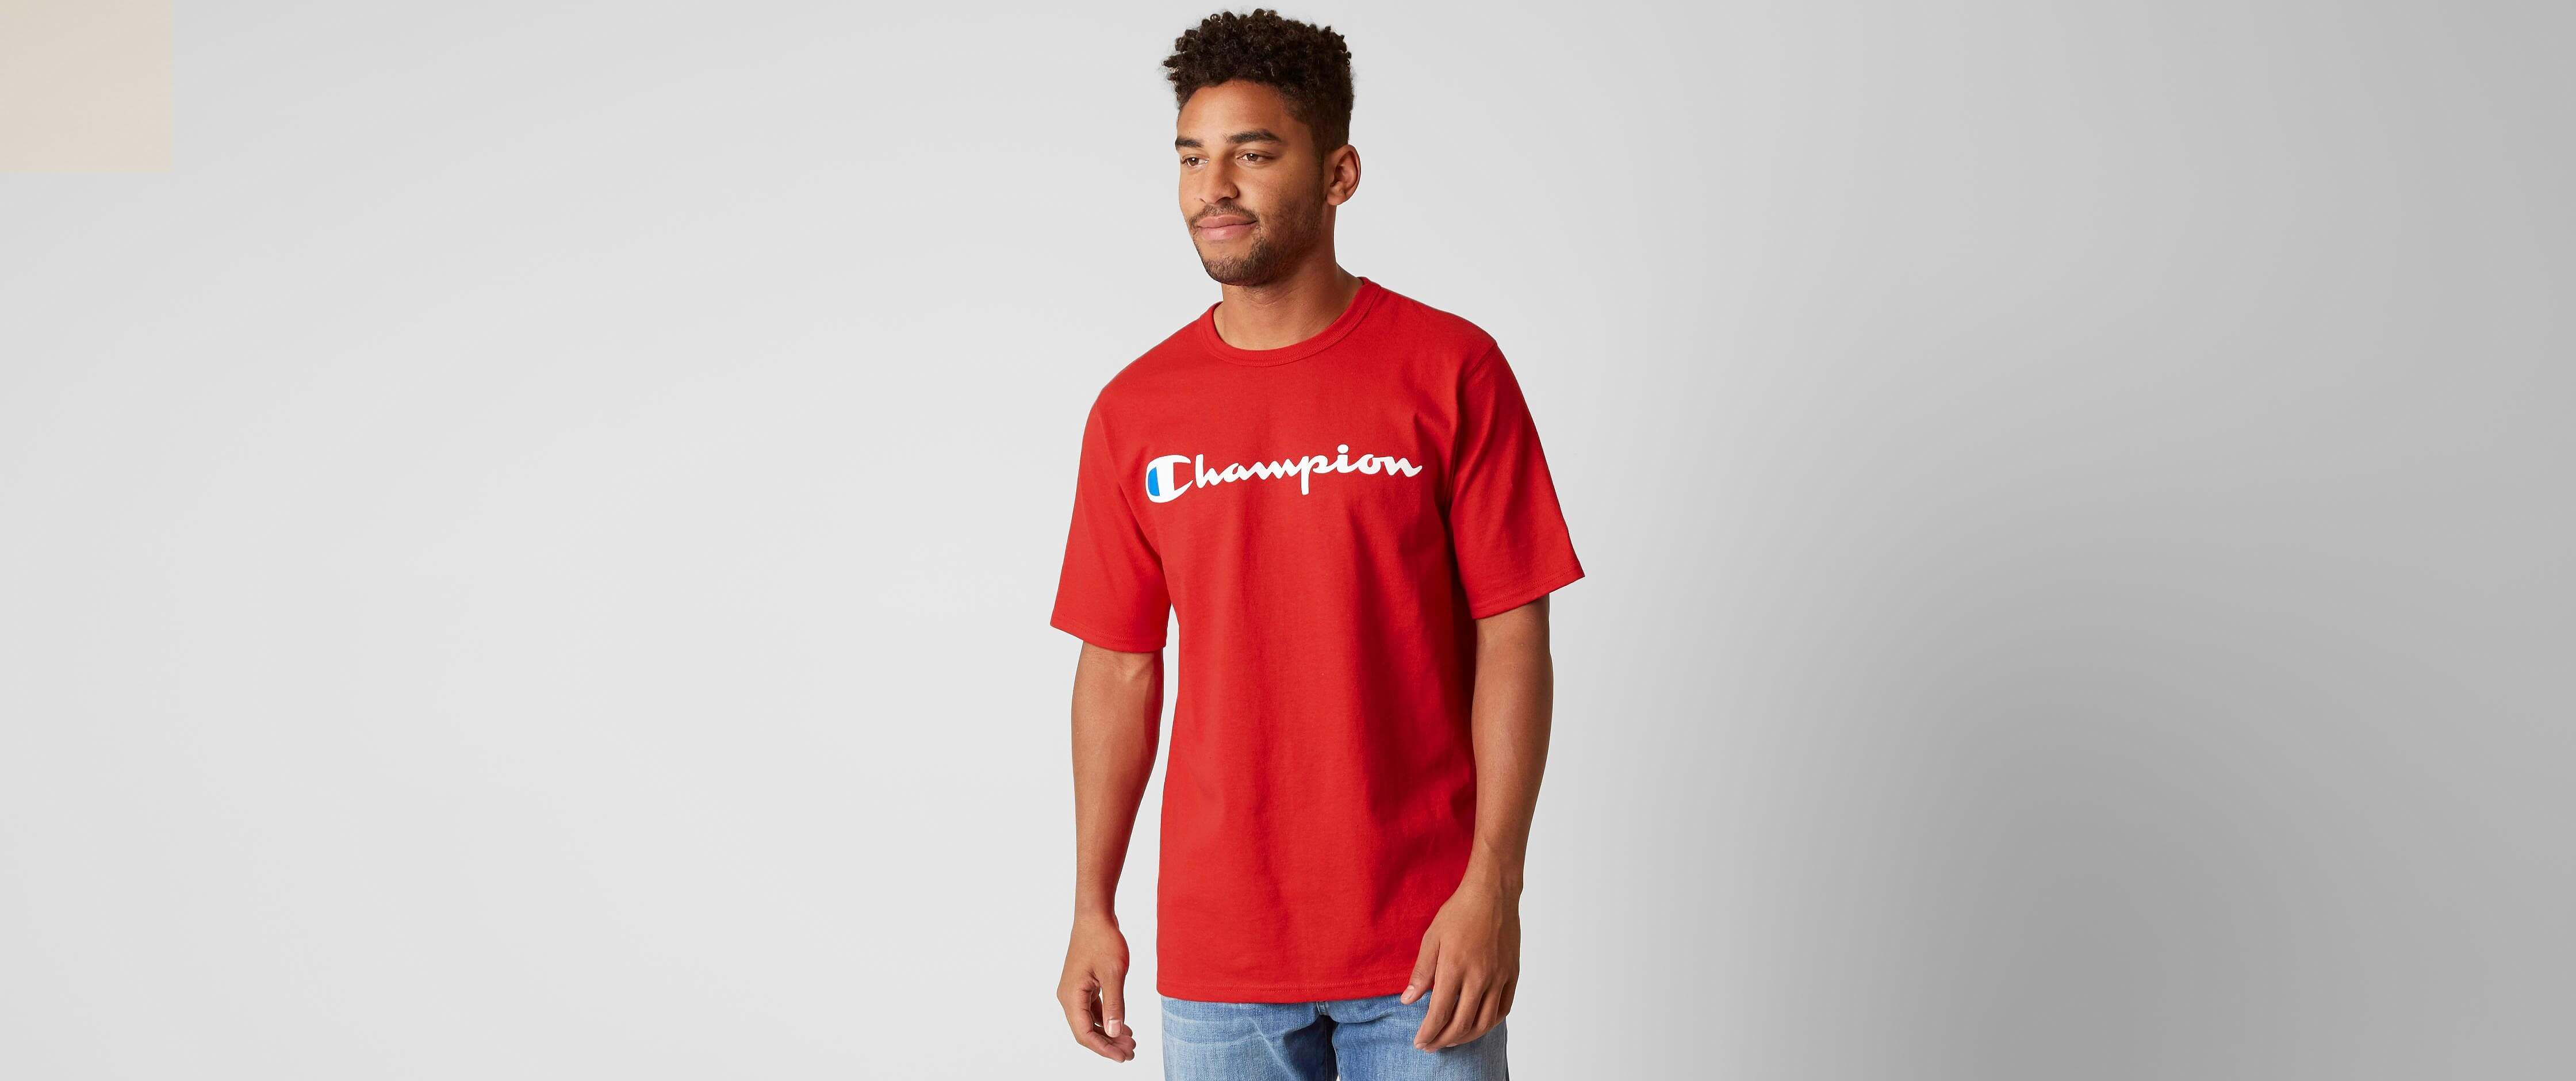 all red champion shirt